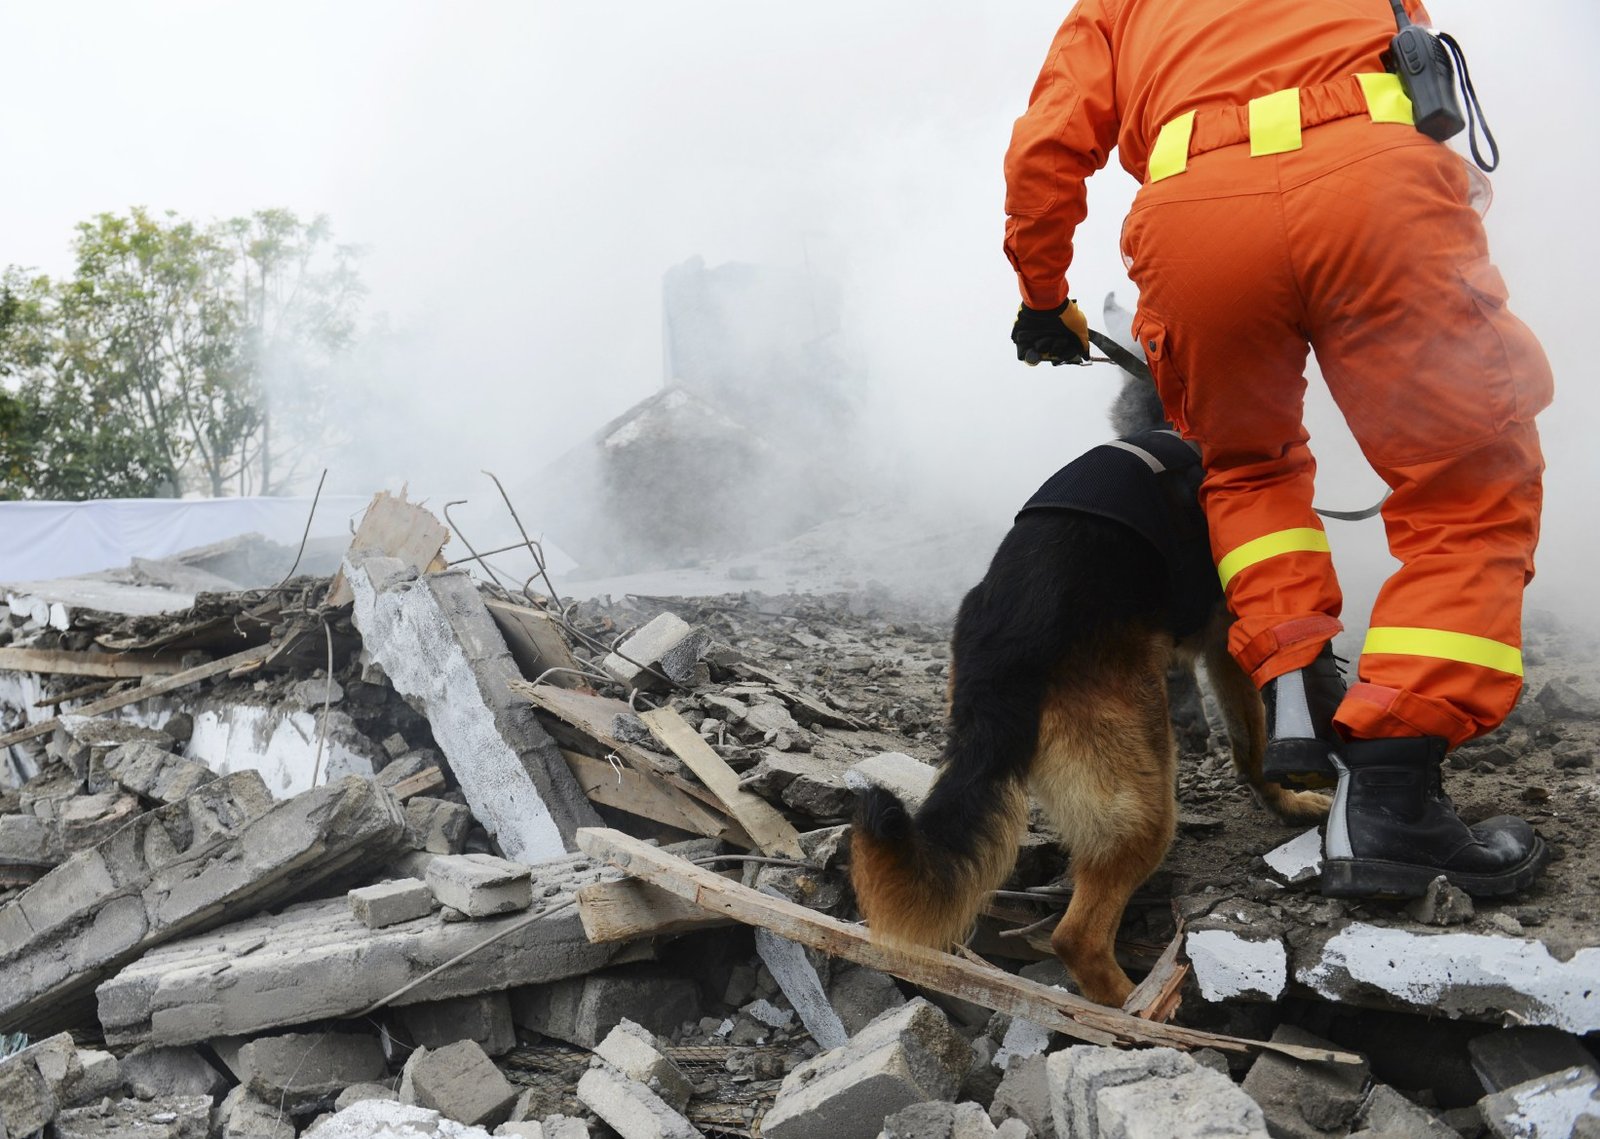 The earthquake in Japan had a magnitude of 9.0 and killed over 15000 people on March 11, 2011.